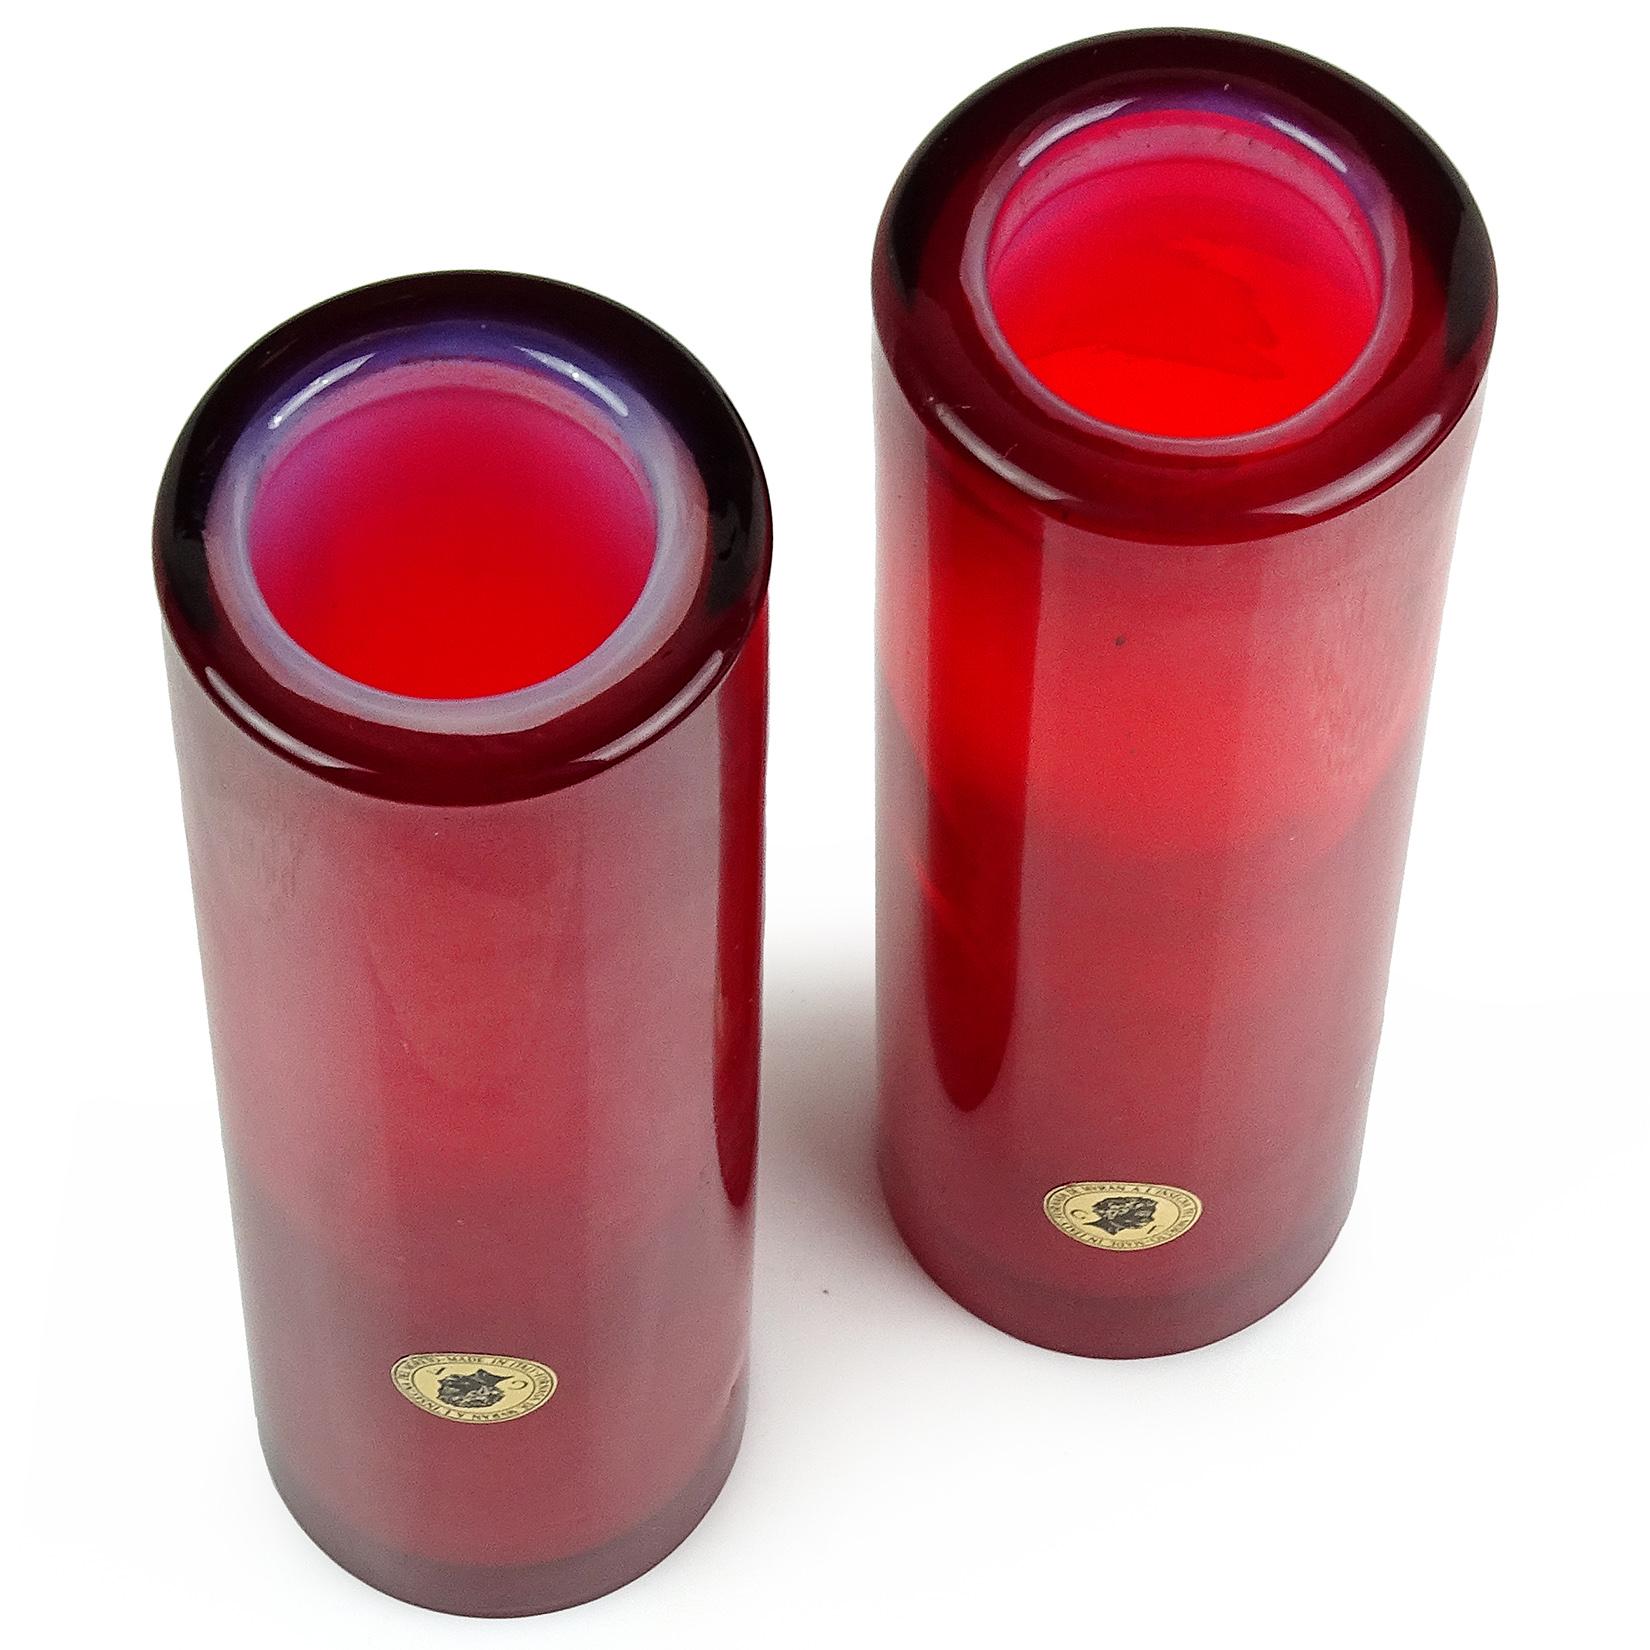 Priced per vase (2 available as shown). Beautiful vintage Murano hand blown red over opalescent white Italian art glass flower vases. Documented to the Galliano Ferro - Fornasa De Murano A L'Insegna Del Moreto Company. Original labels attached to